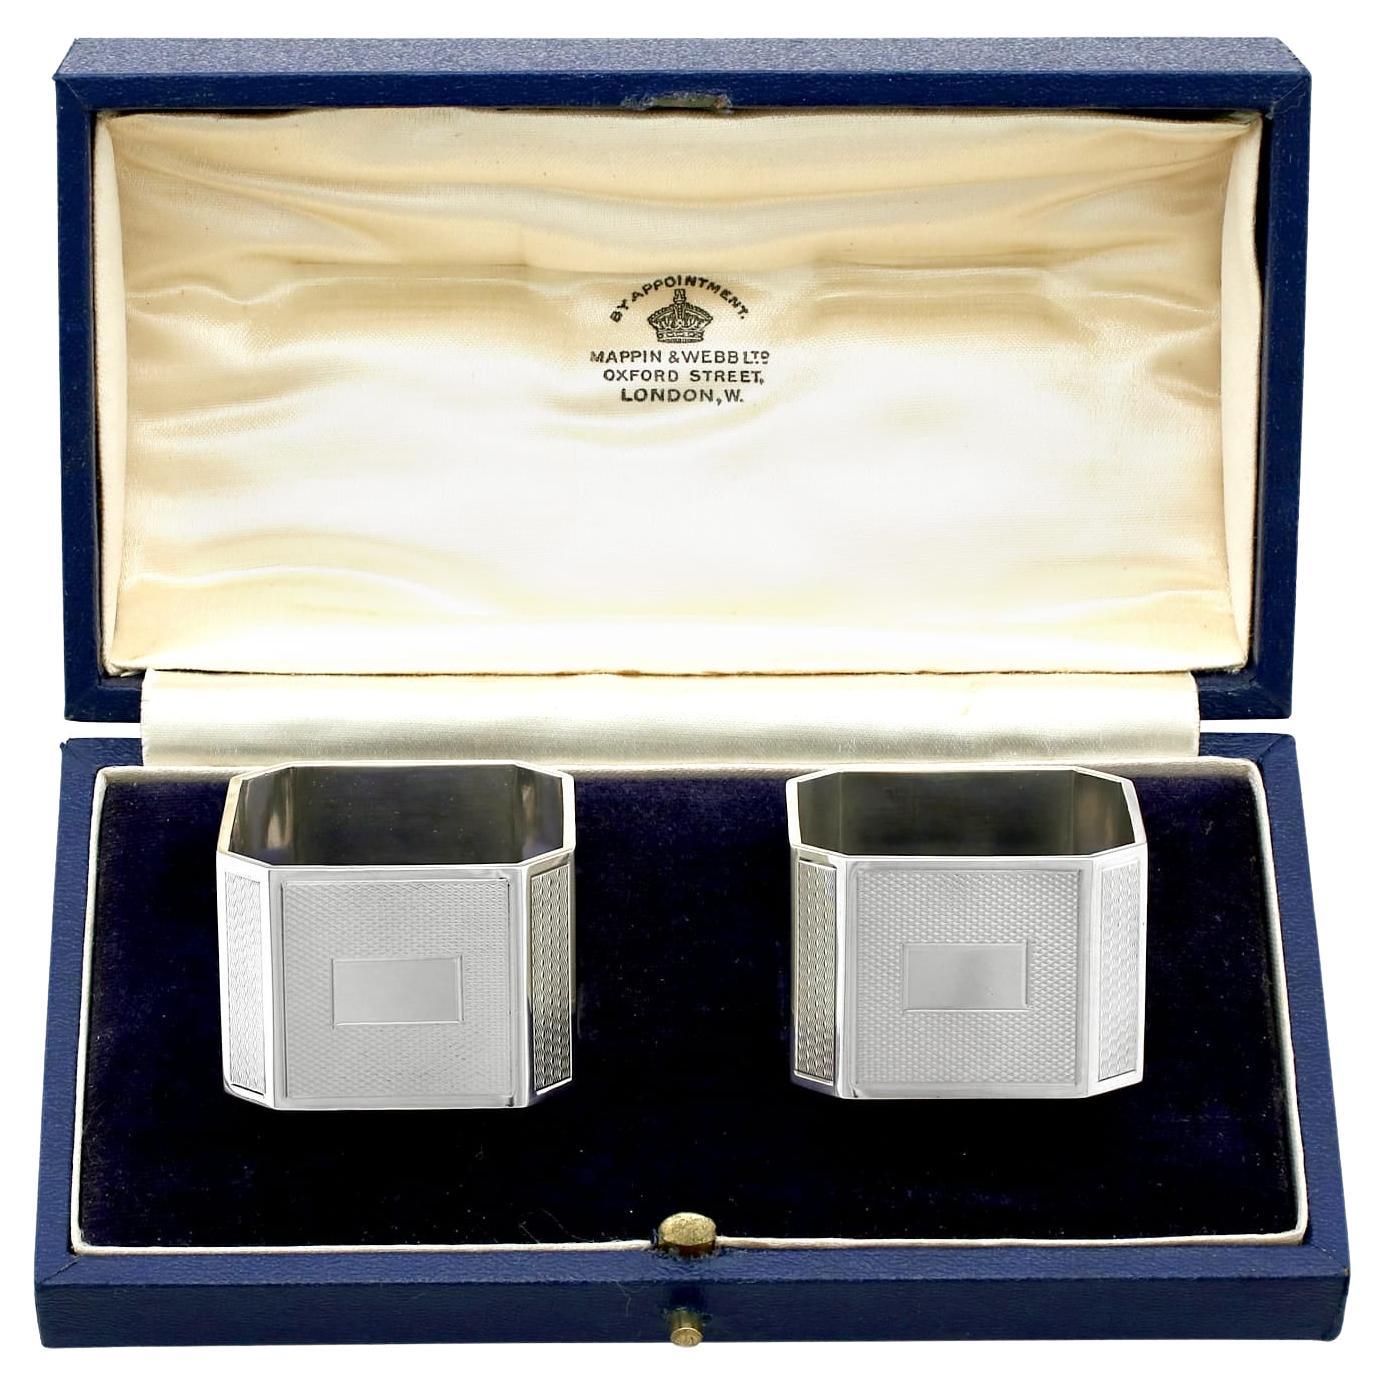 Mappin & Webb 20th Century Sterling Silver Napkin Rings